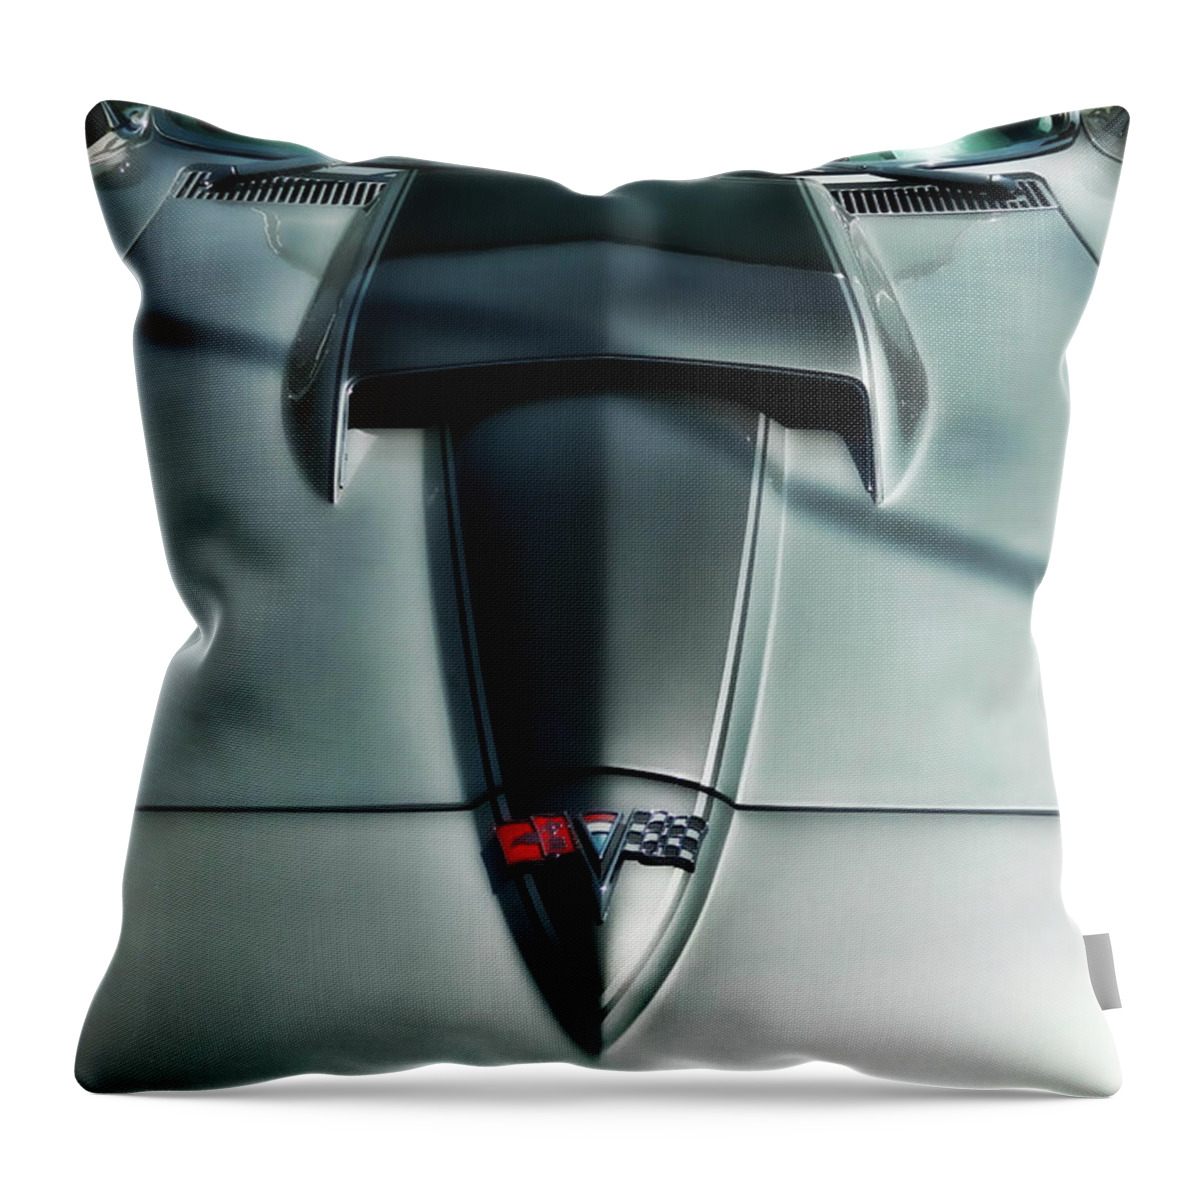 Victor Montgomery Throw Pillow featuring the photograph Vette Hood by Vic Montgomery